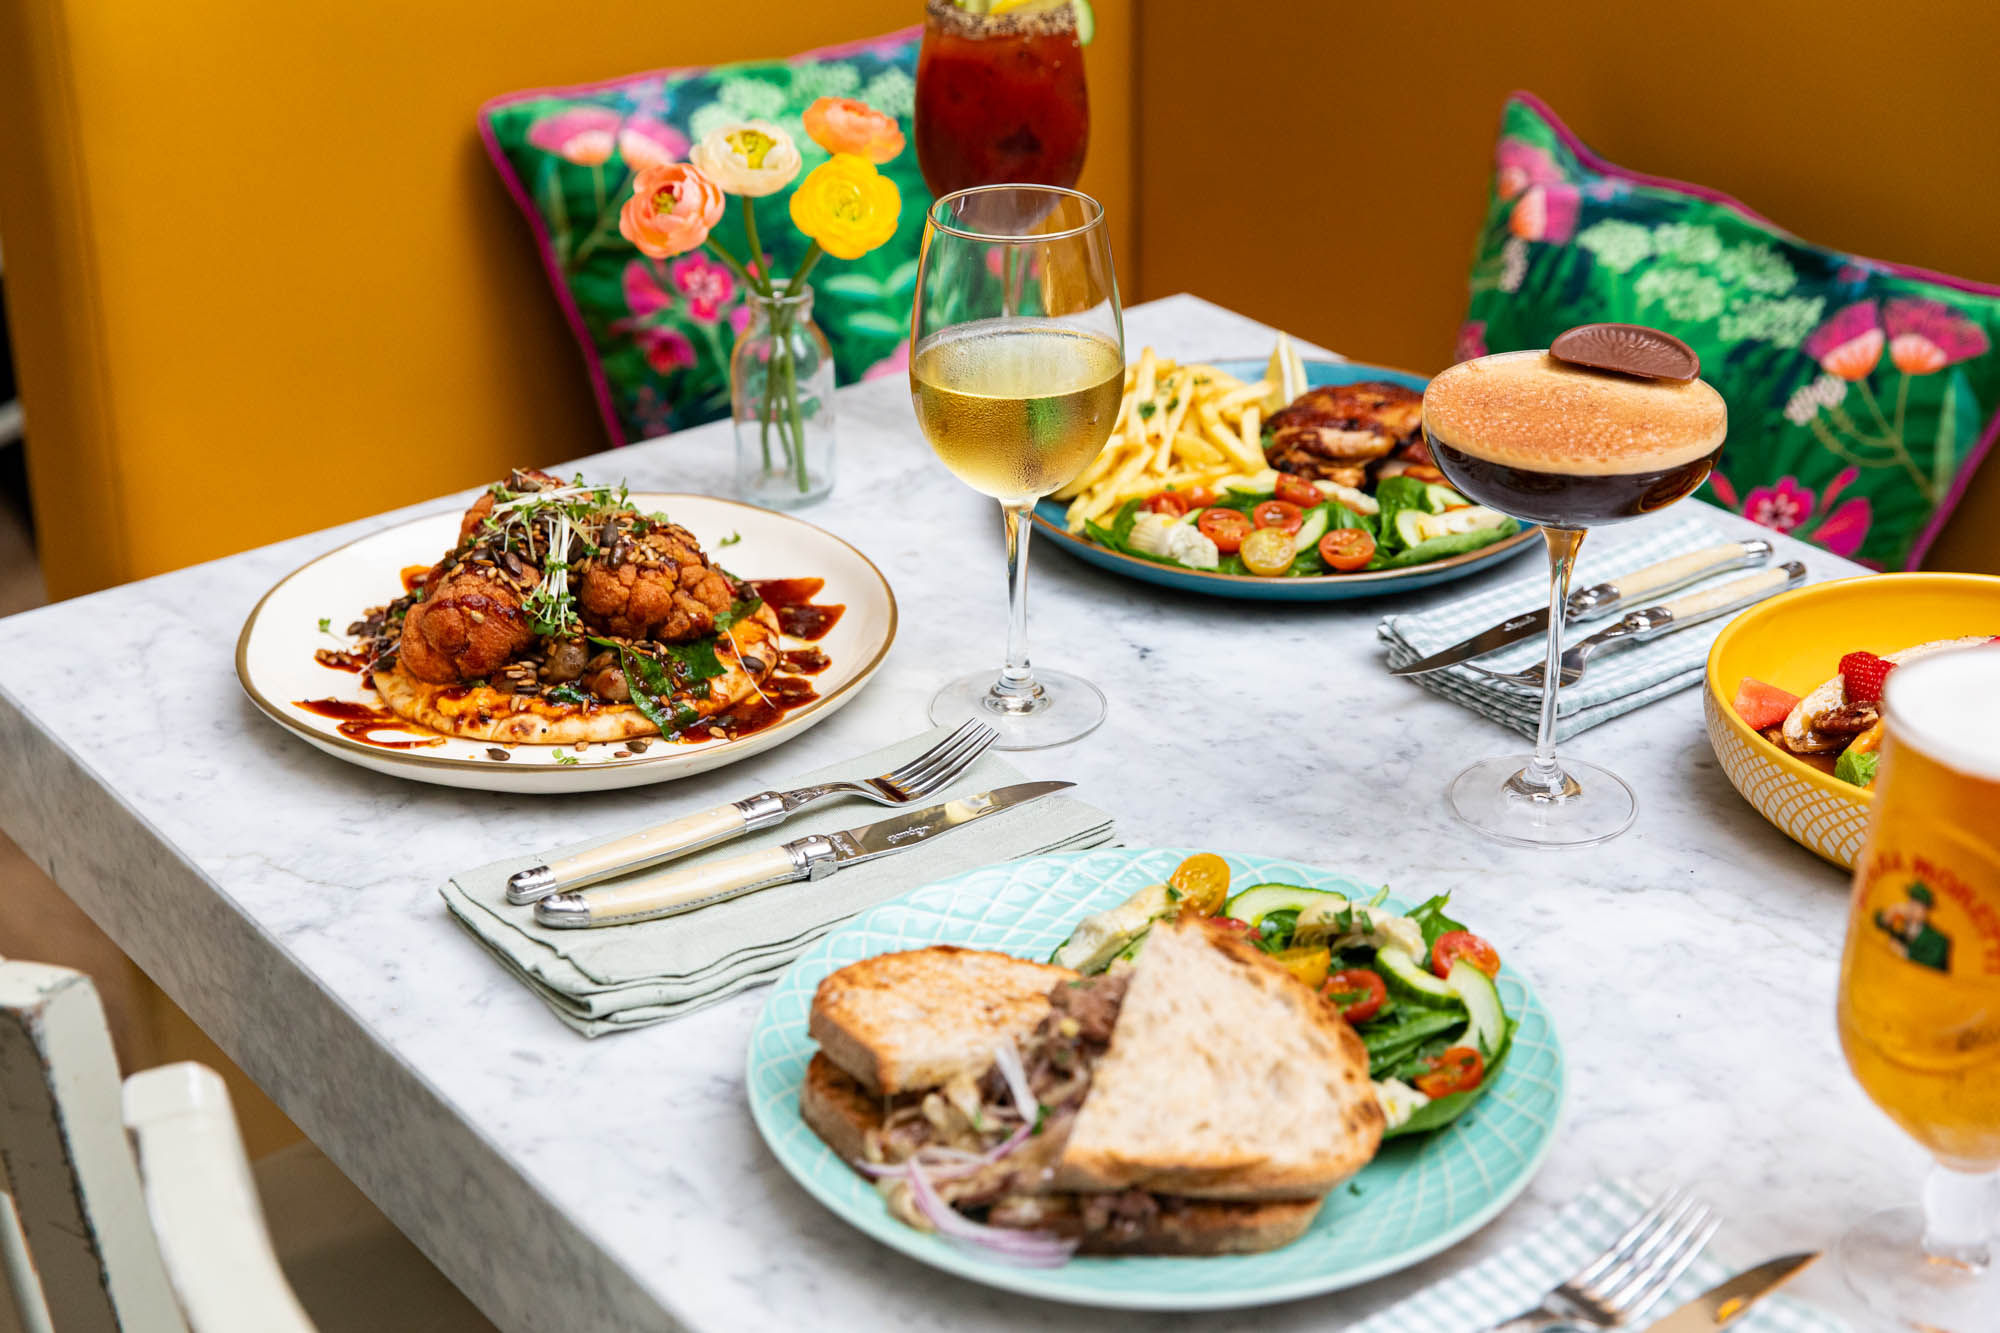 Plates of colourful food served on a marble table with a vibrant cushion in the background.